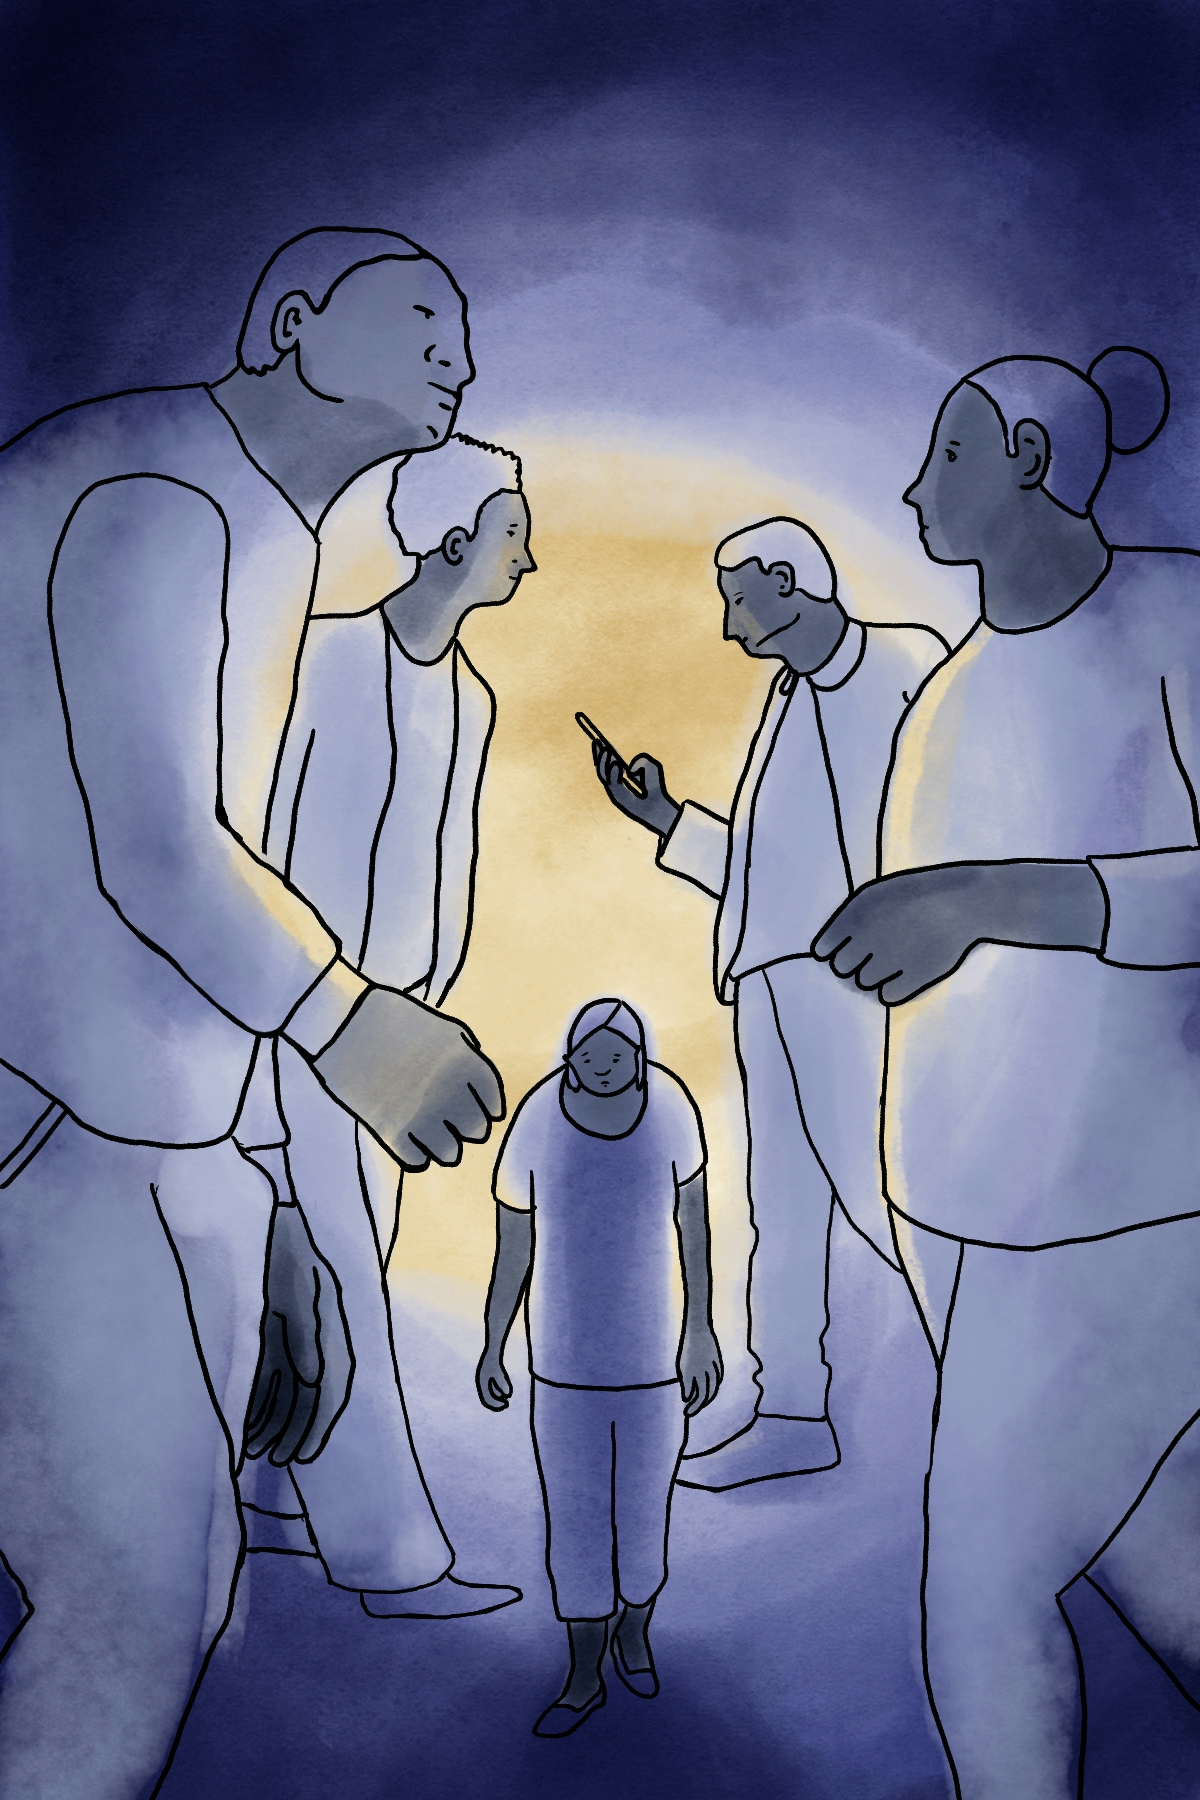 Illustration of a woman walking between four other people twice her height, representing how insignificant social anxiety sufferers can feel.